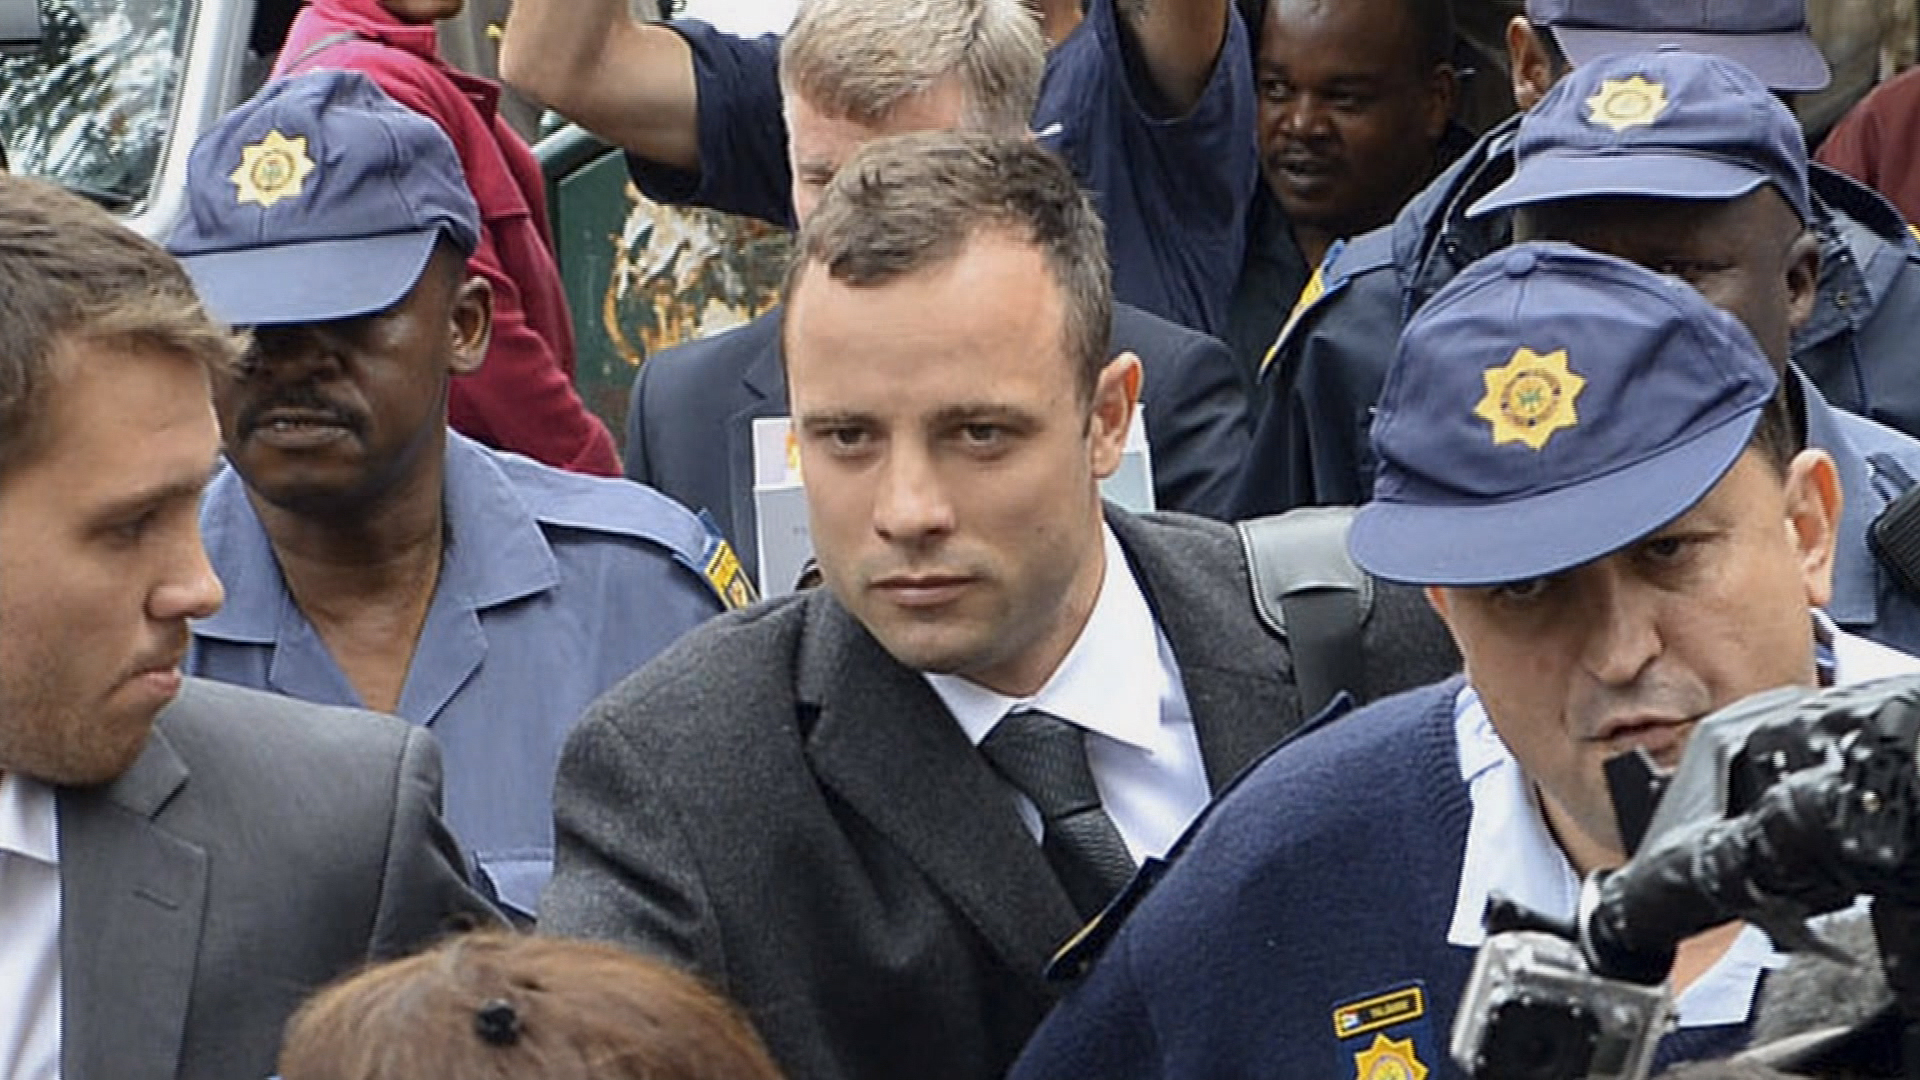 Oscar Pistorius set to be released from prison after 1 year in prison - TODAY.com1920 x 1080